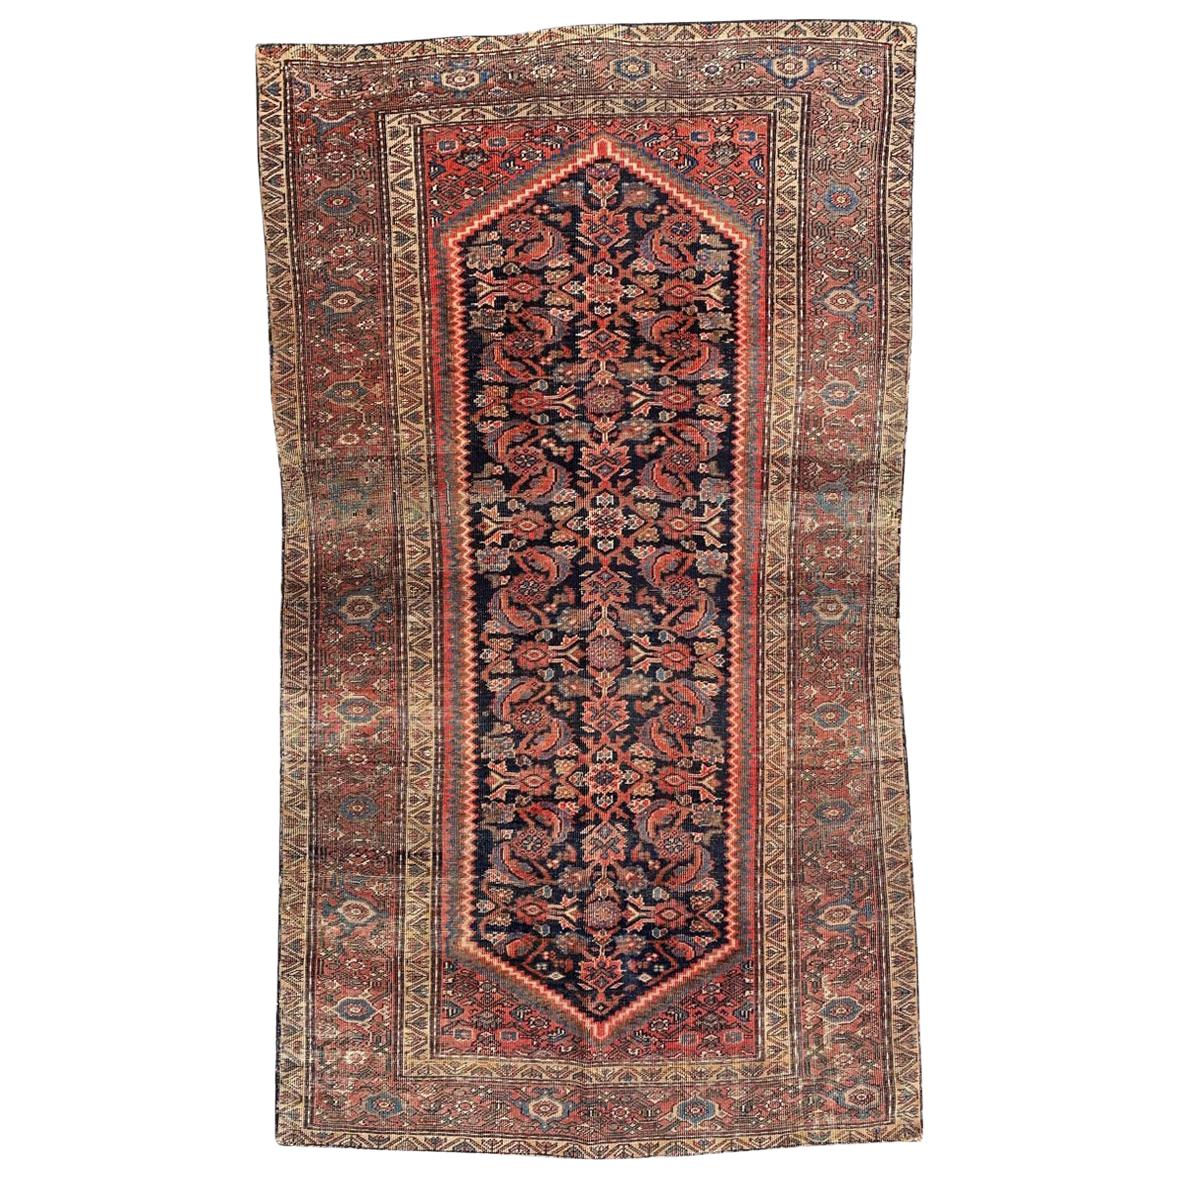 Bobyrug’s Beautiful Antique Mahal Ferahan Rug For Sale